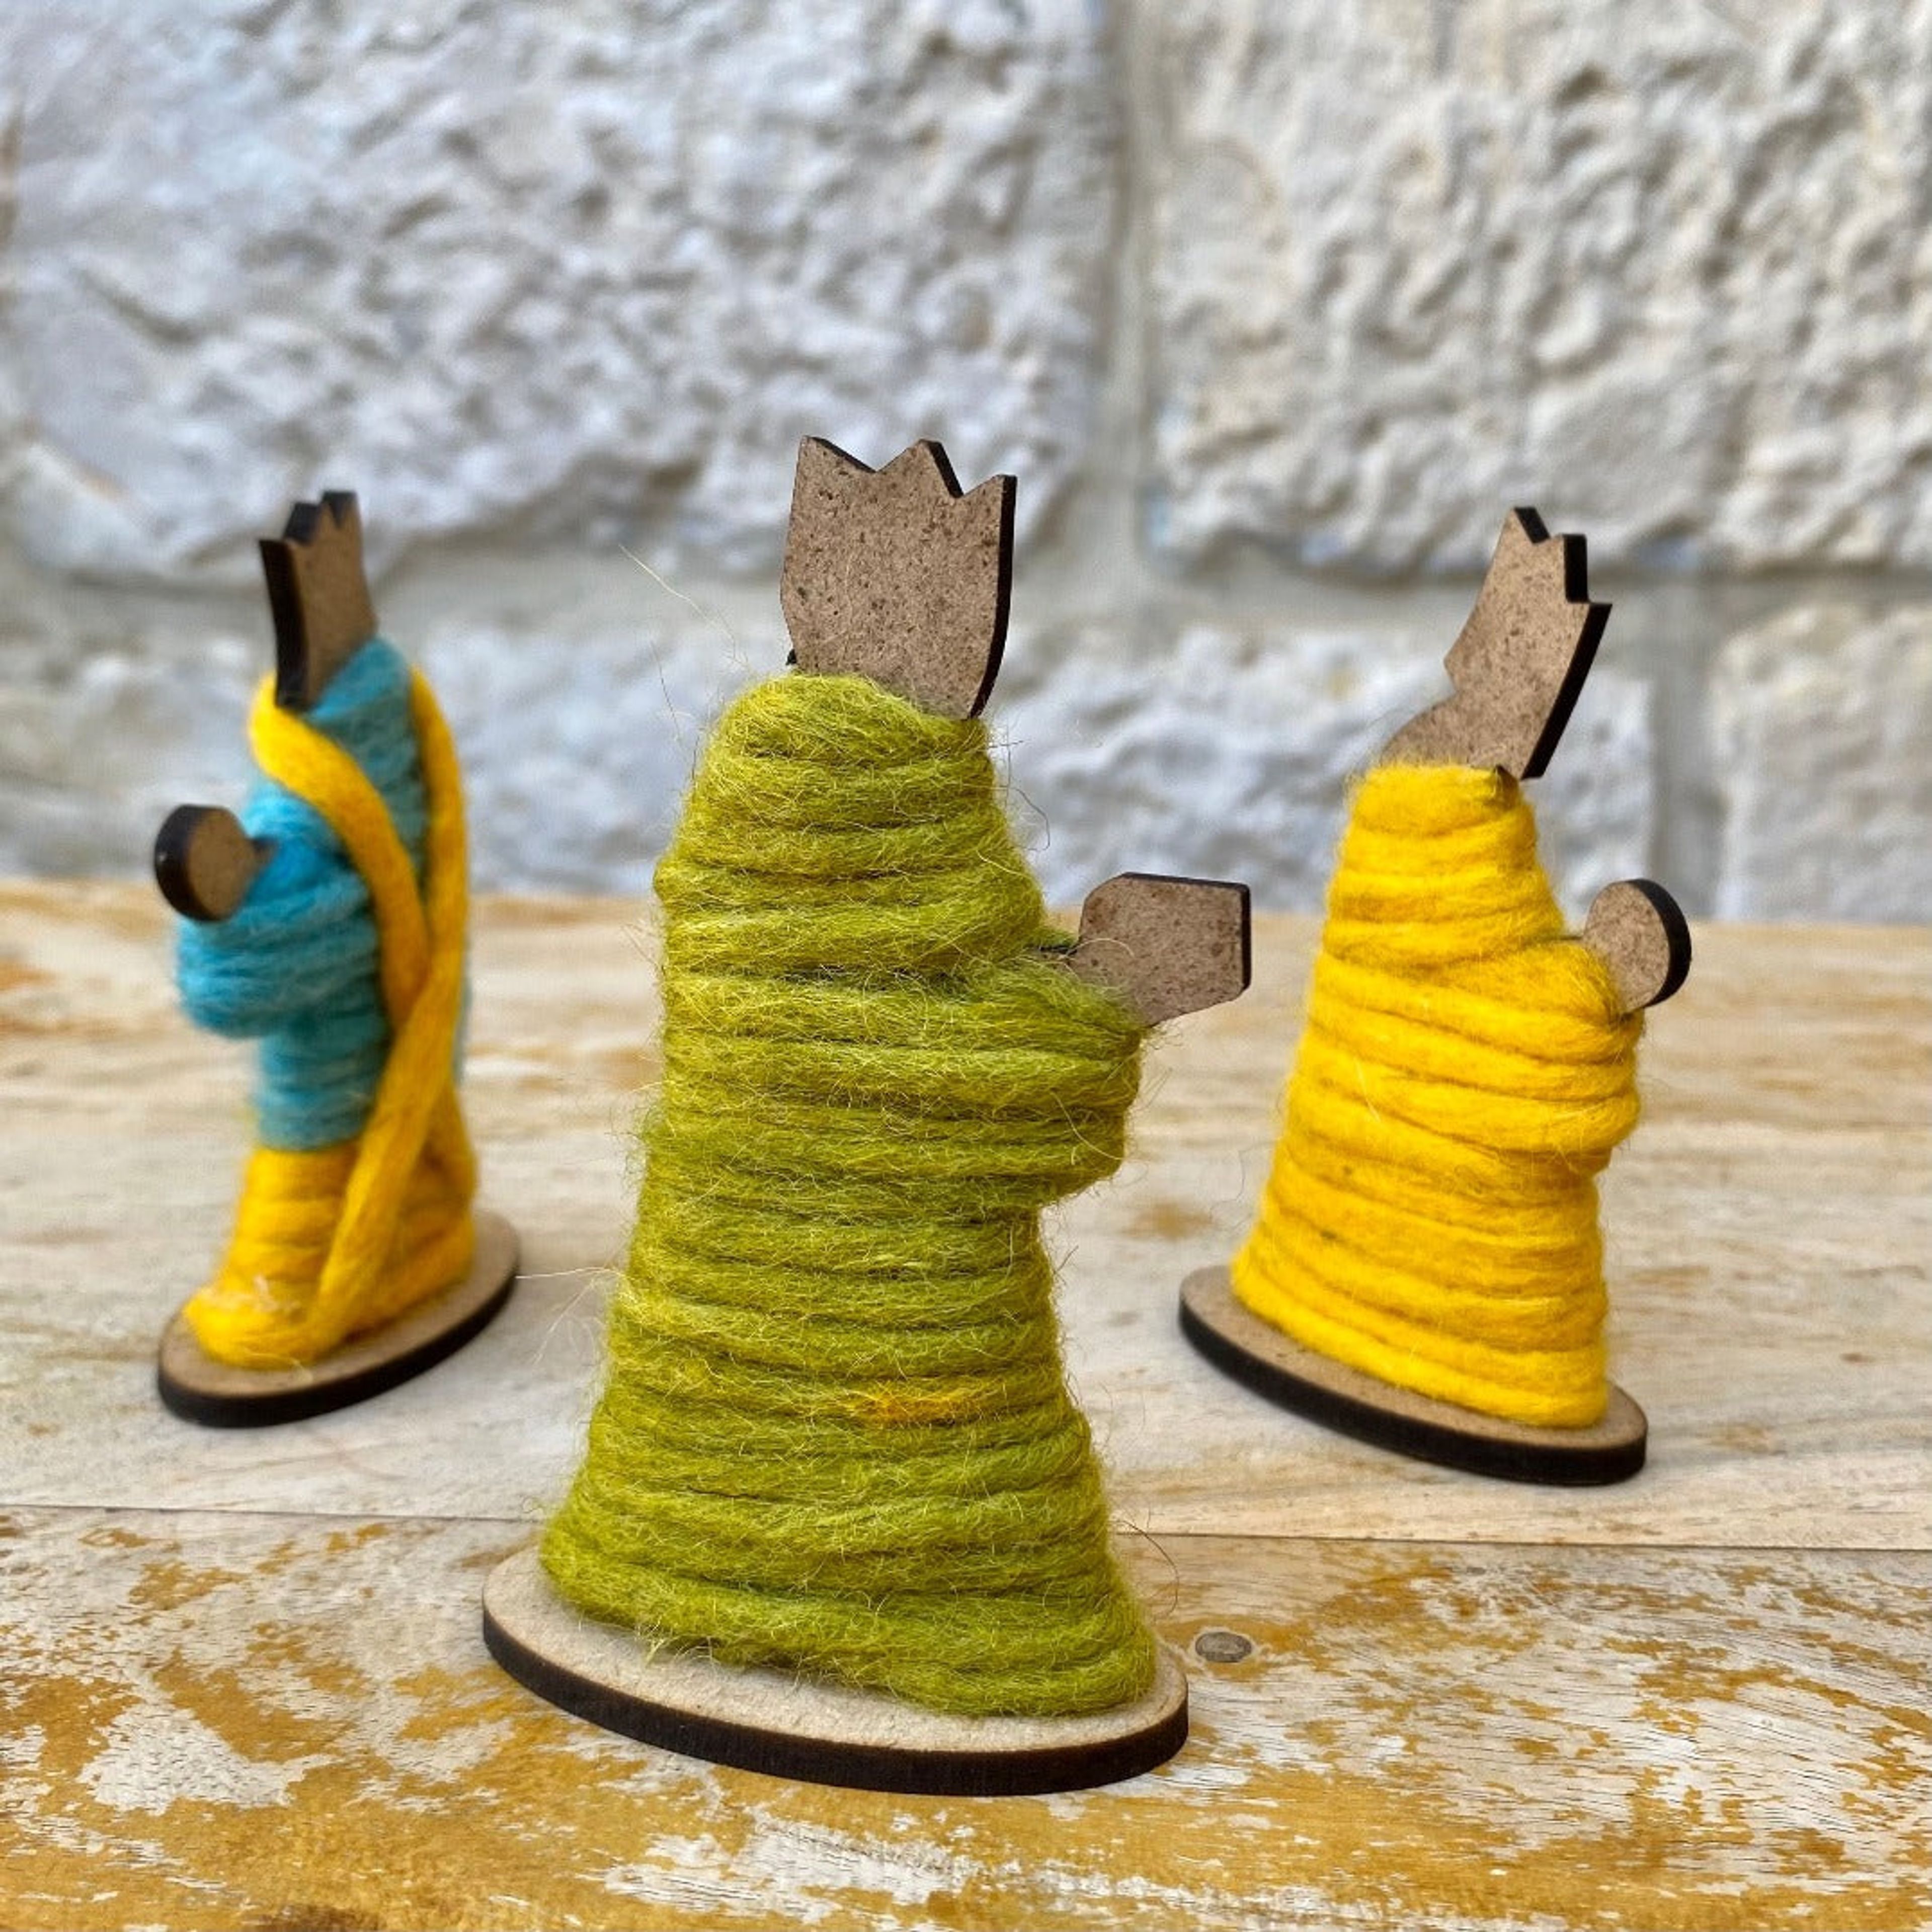 Unique Handmade Christmas Nativity Set in Wool from Palestine